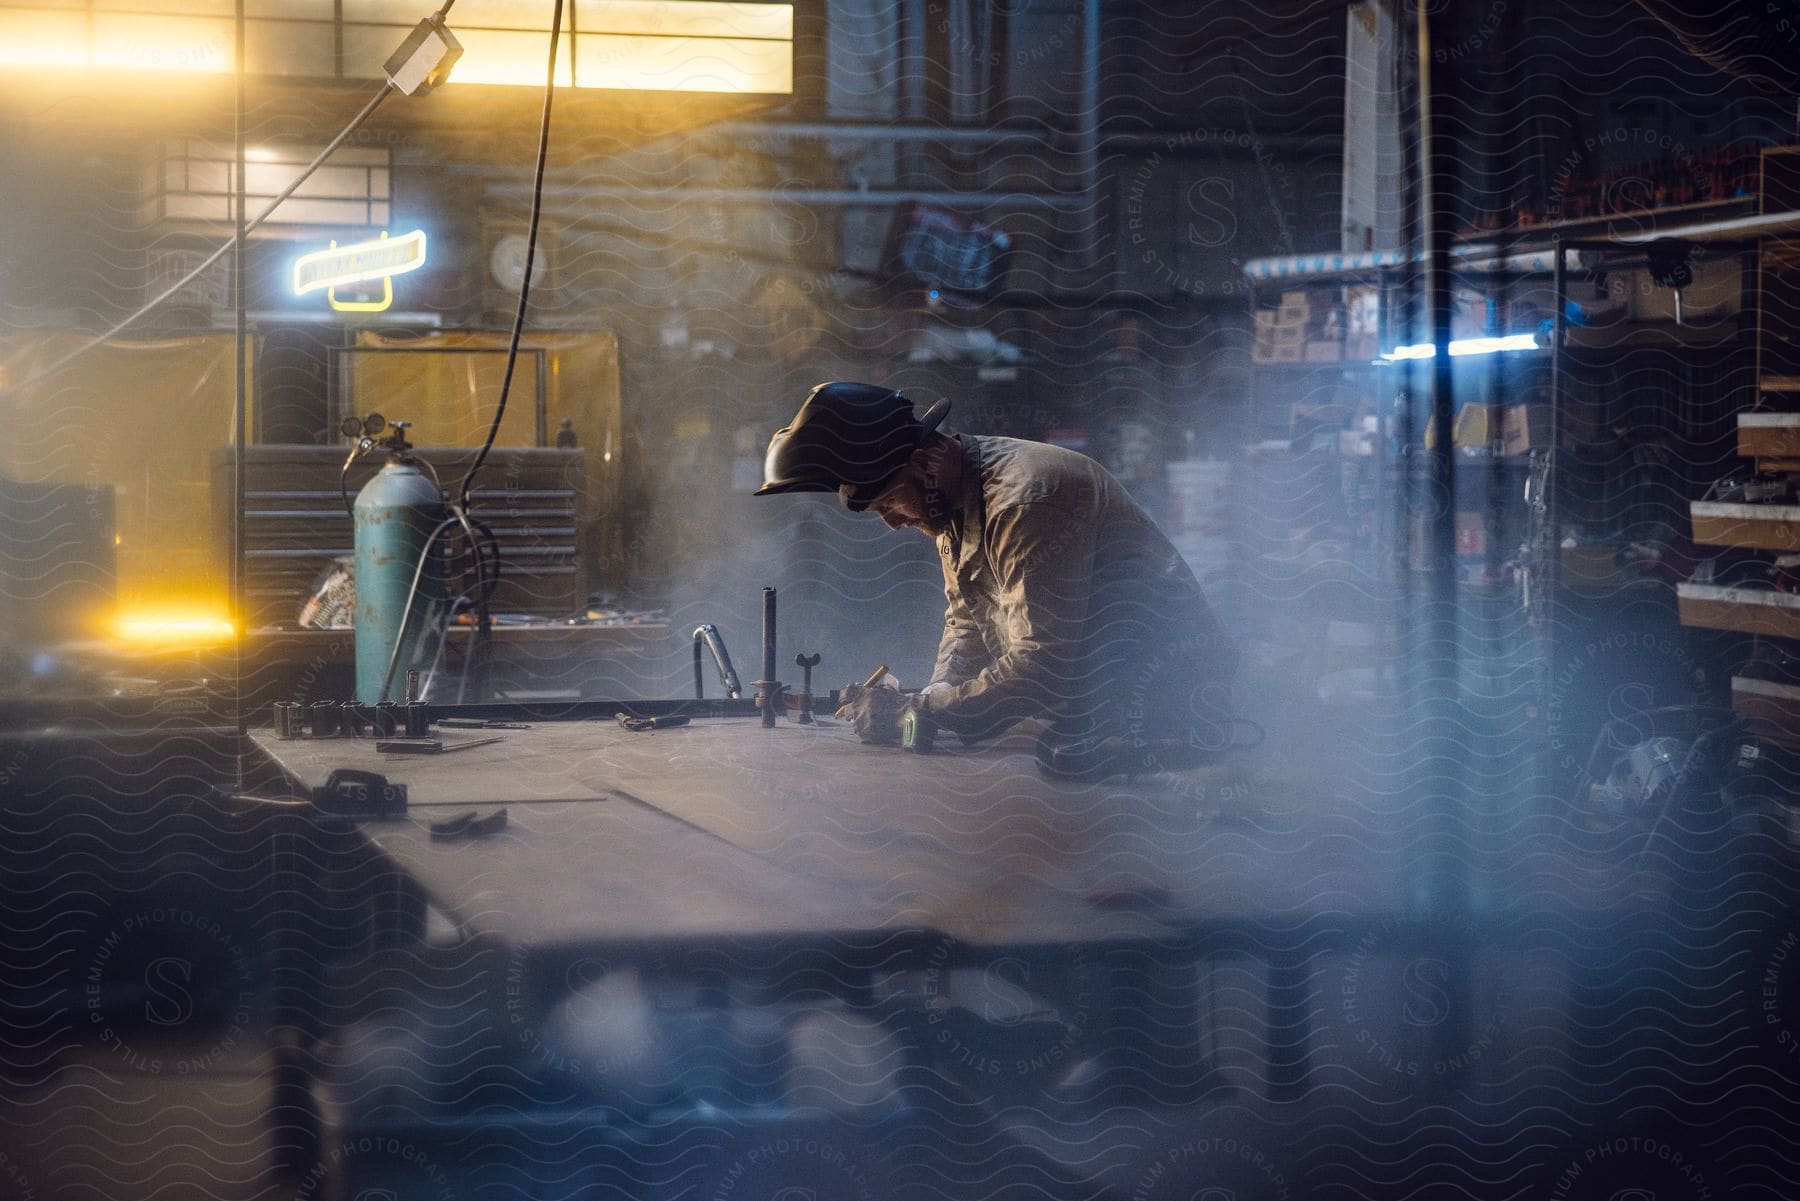 Welder using a construction pencil to write on a table in an indoor environment with welding tools.